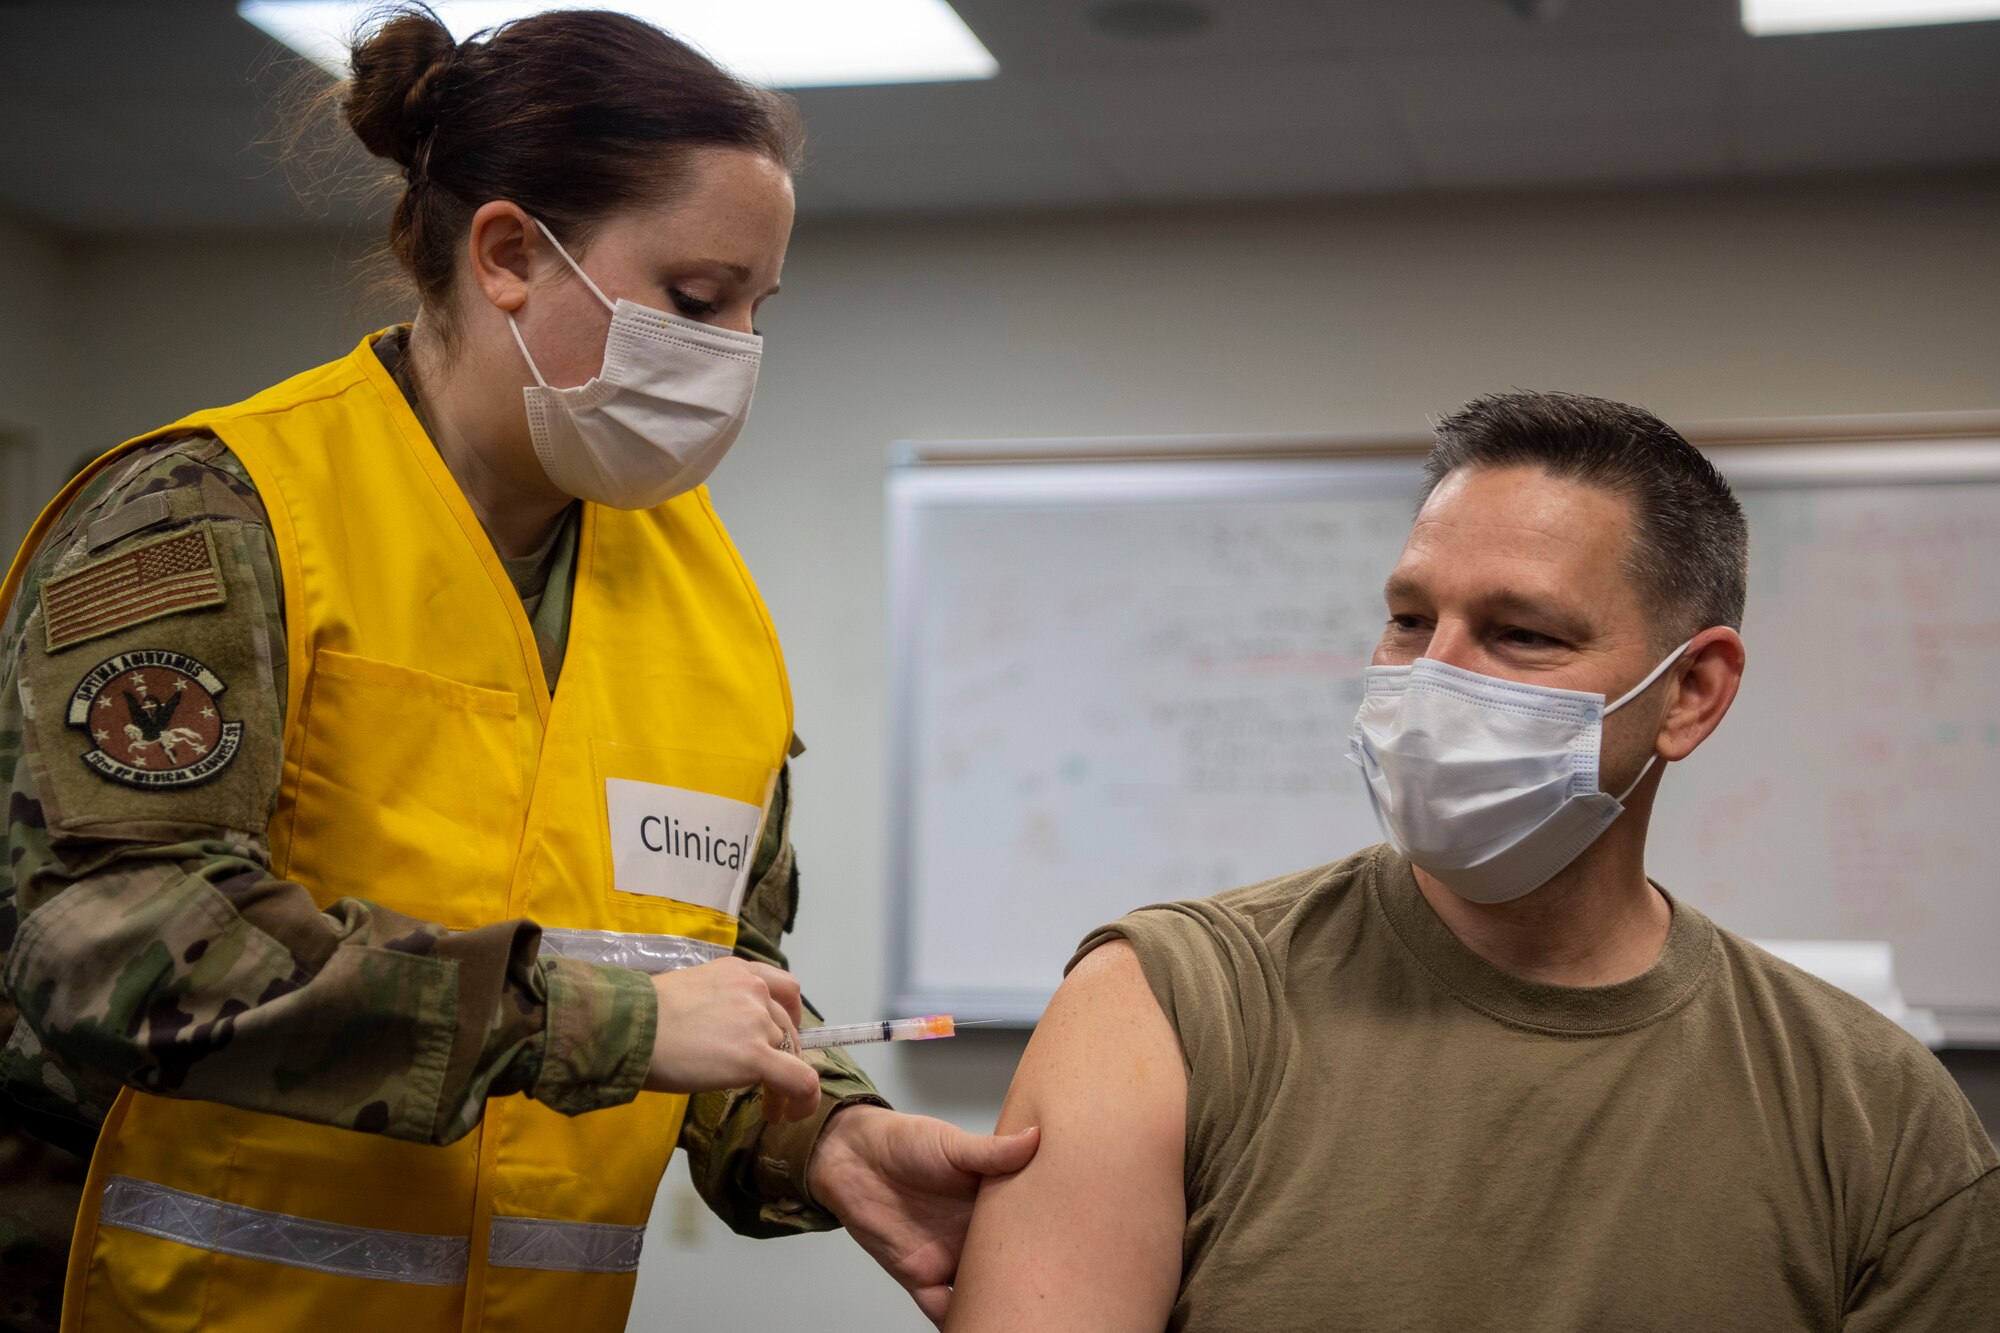 The 19th Medical Group superintendent receives the COVID-19 vaccine from a medical technician.